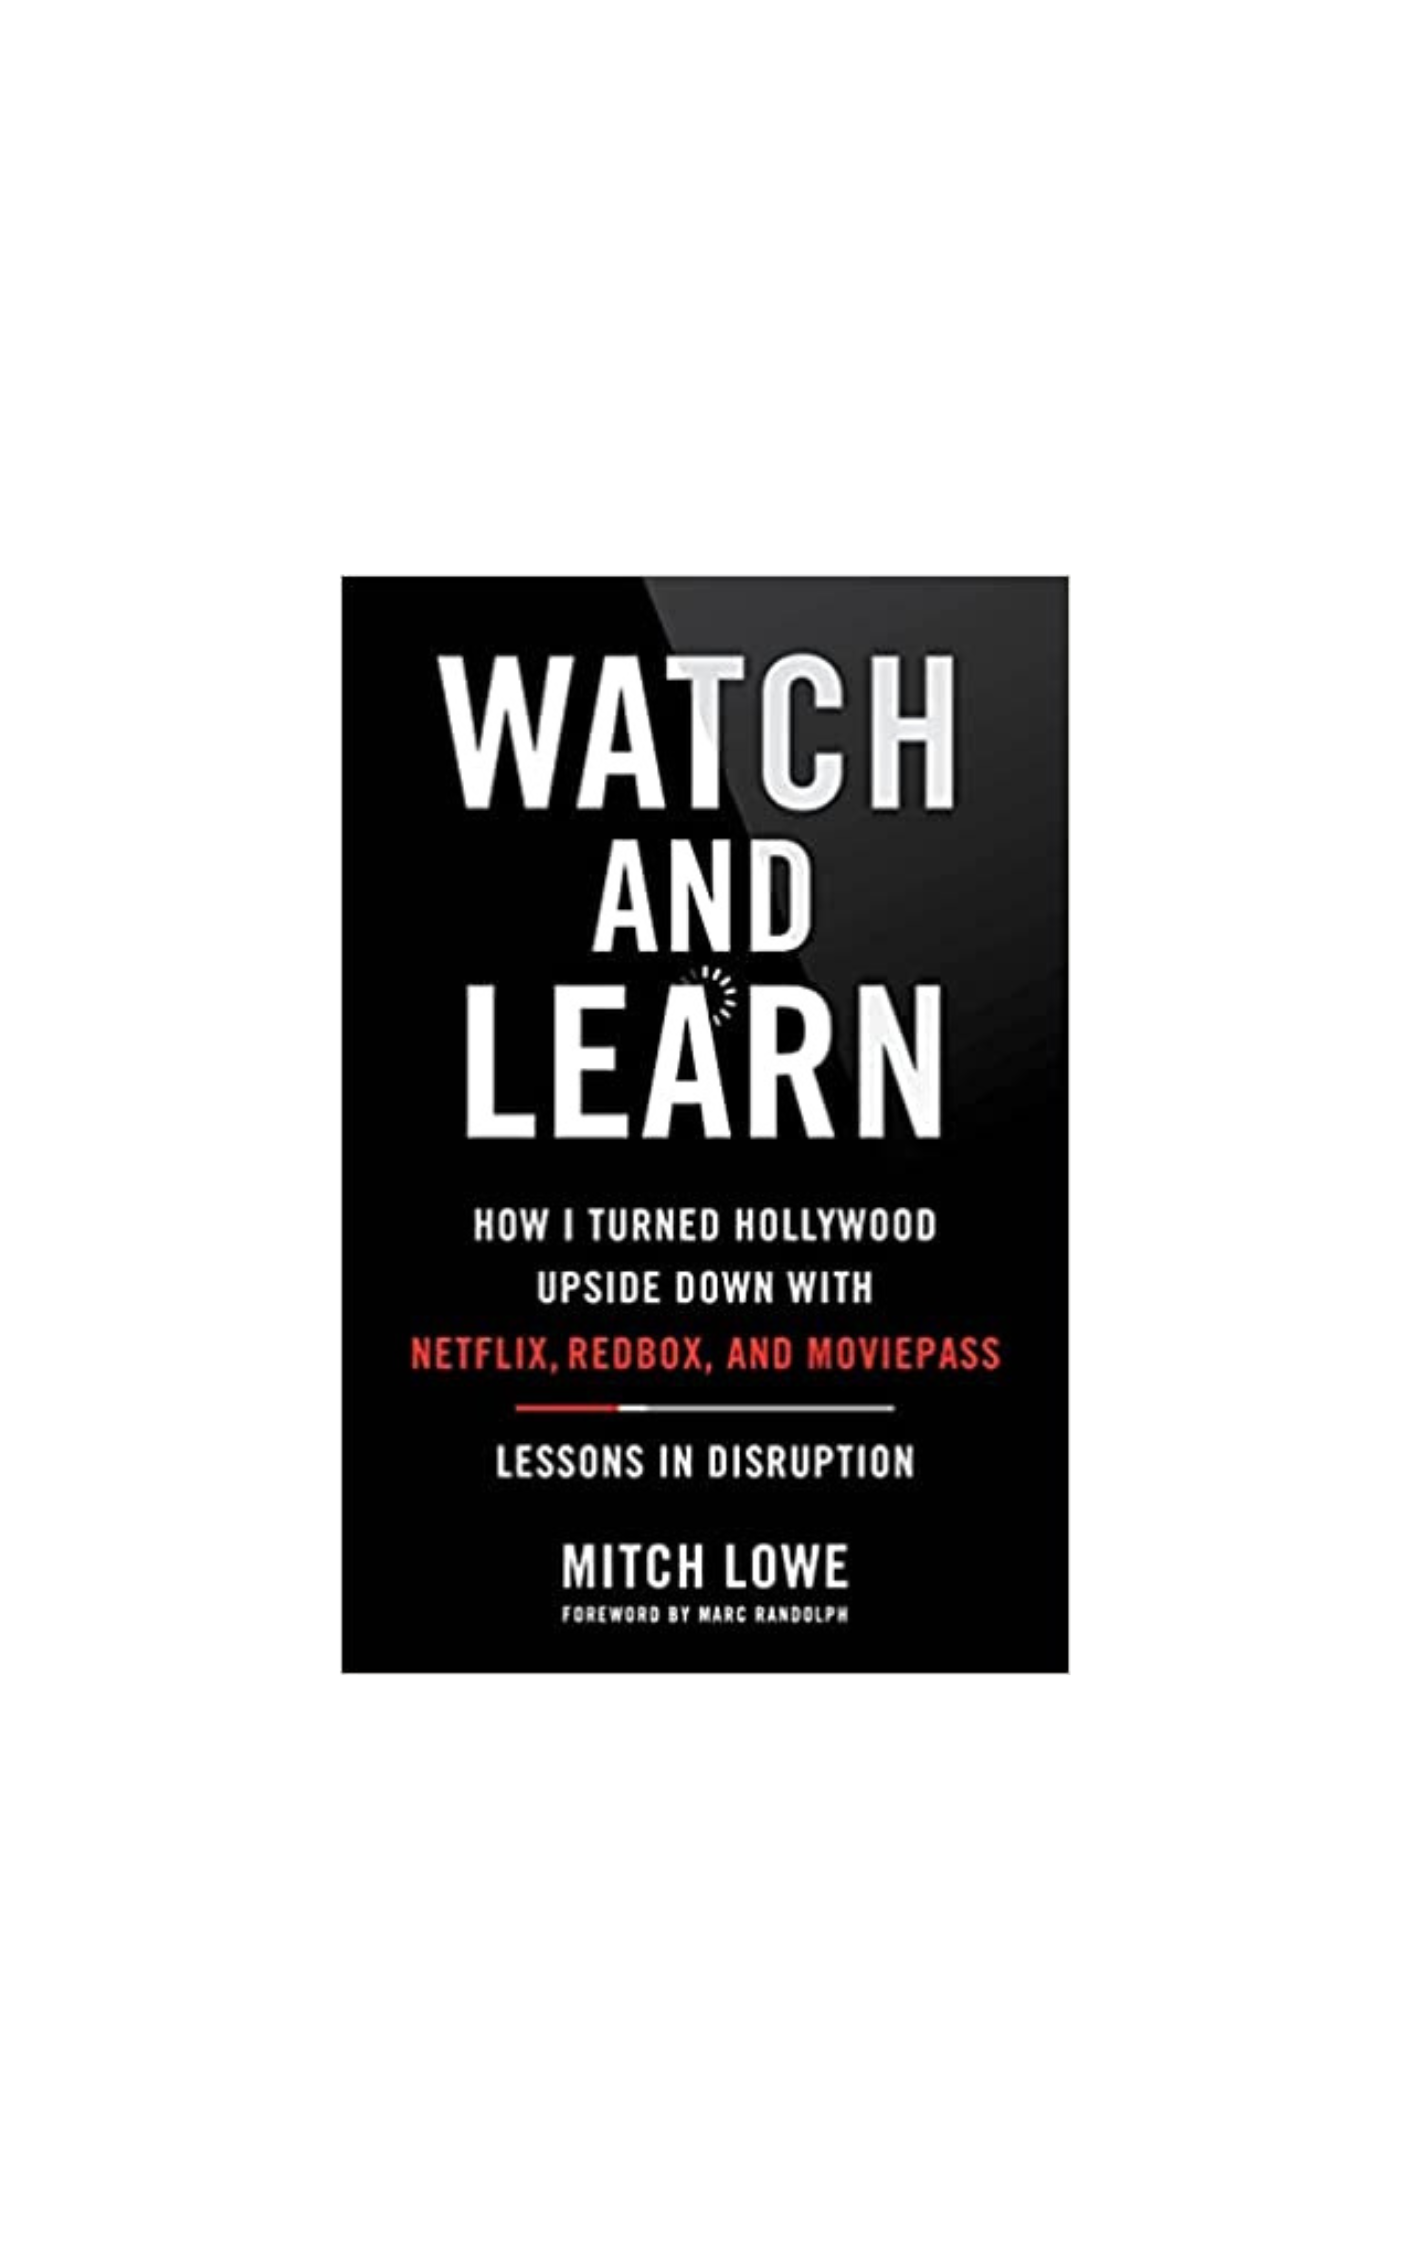 Mitch Lowe’s new book ‘Watch and Learn: How I Turned Hollywood Upside Down with Netflix, Redbox, and MoviePass―Lessons in Disruption